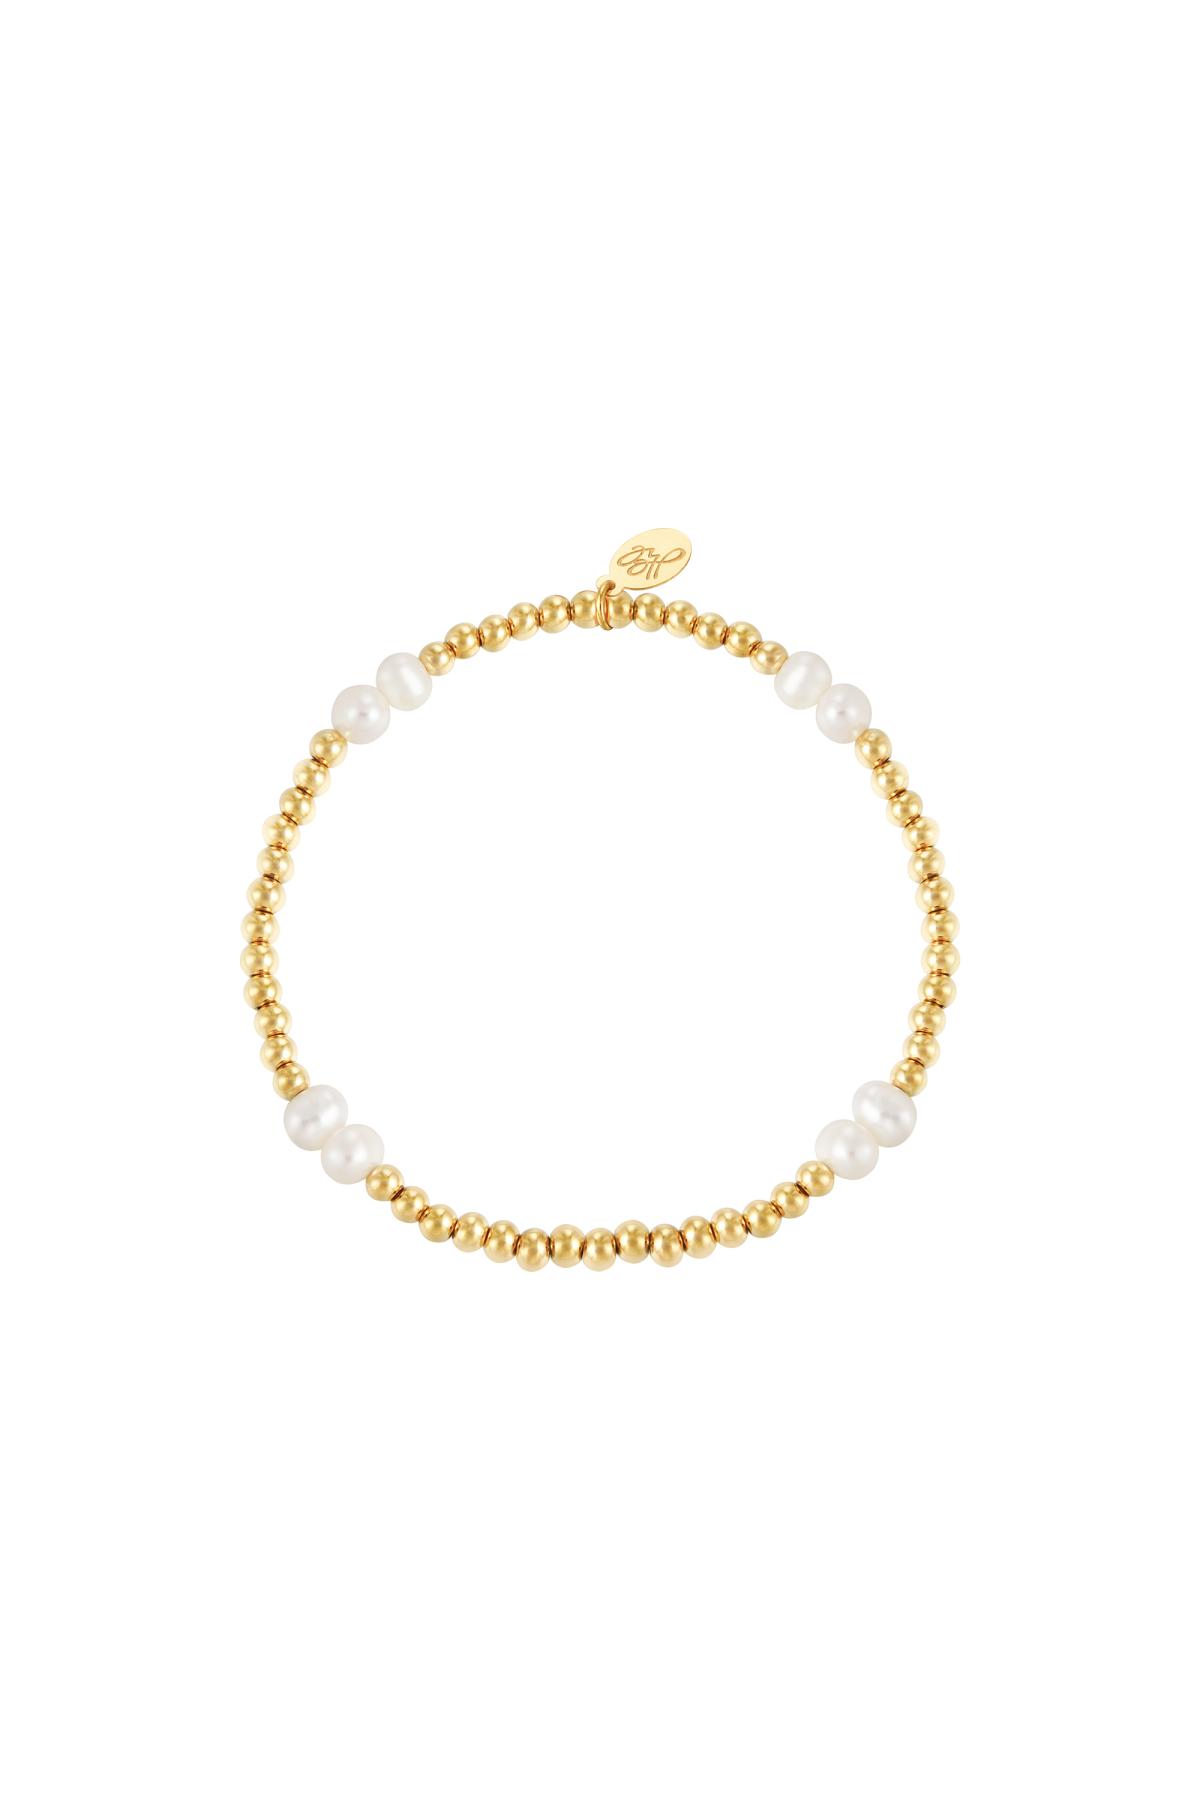 Bracelet pearl mix Gold Stainless Steel h5 